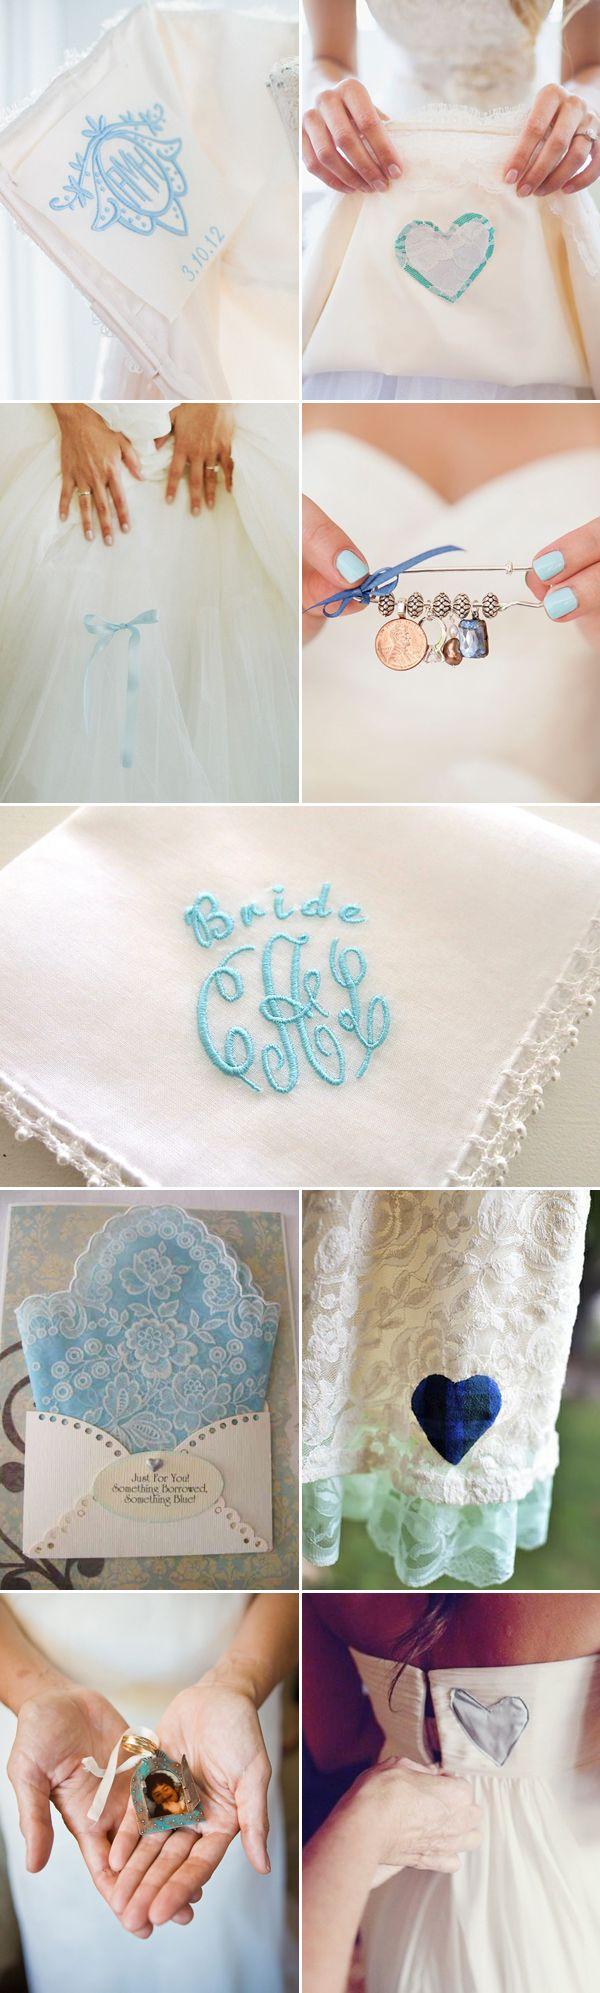 Wedding - 55 Creative Ideas For Your "Something Blue"